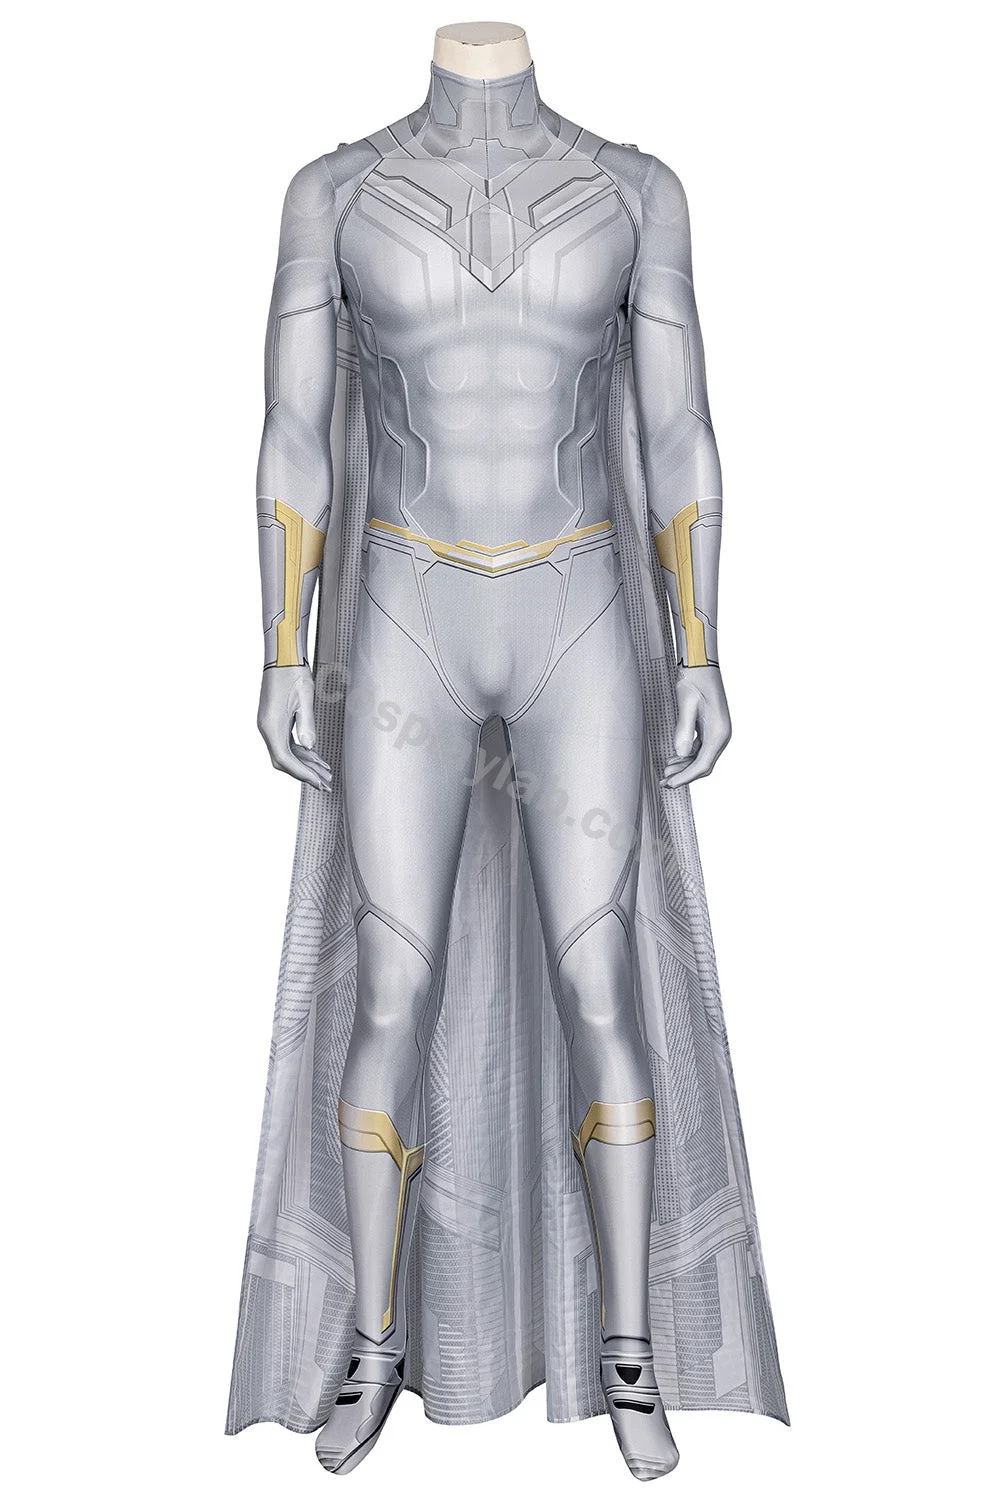 White Vision Cosplay Costume WandaVision Spandex Cosplay Suit By CosplayLab